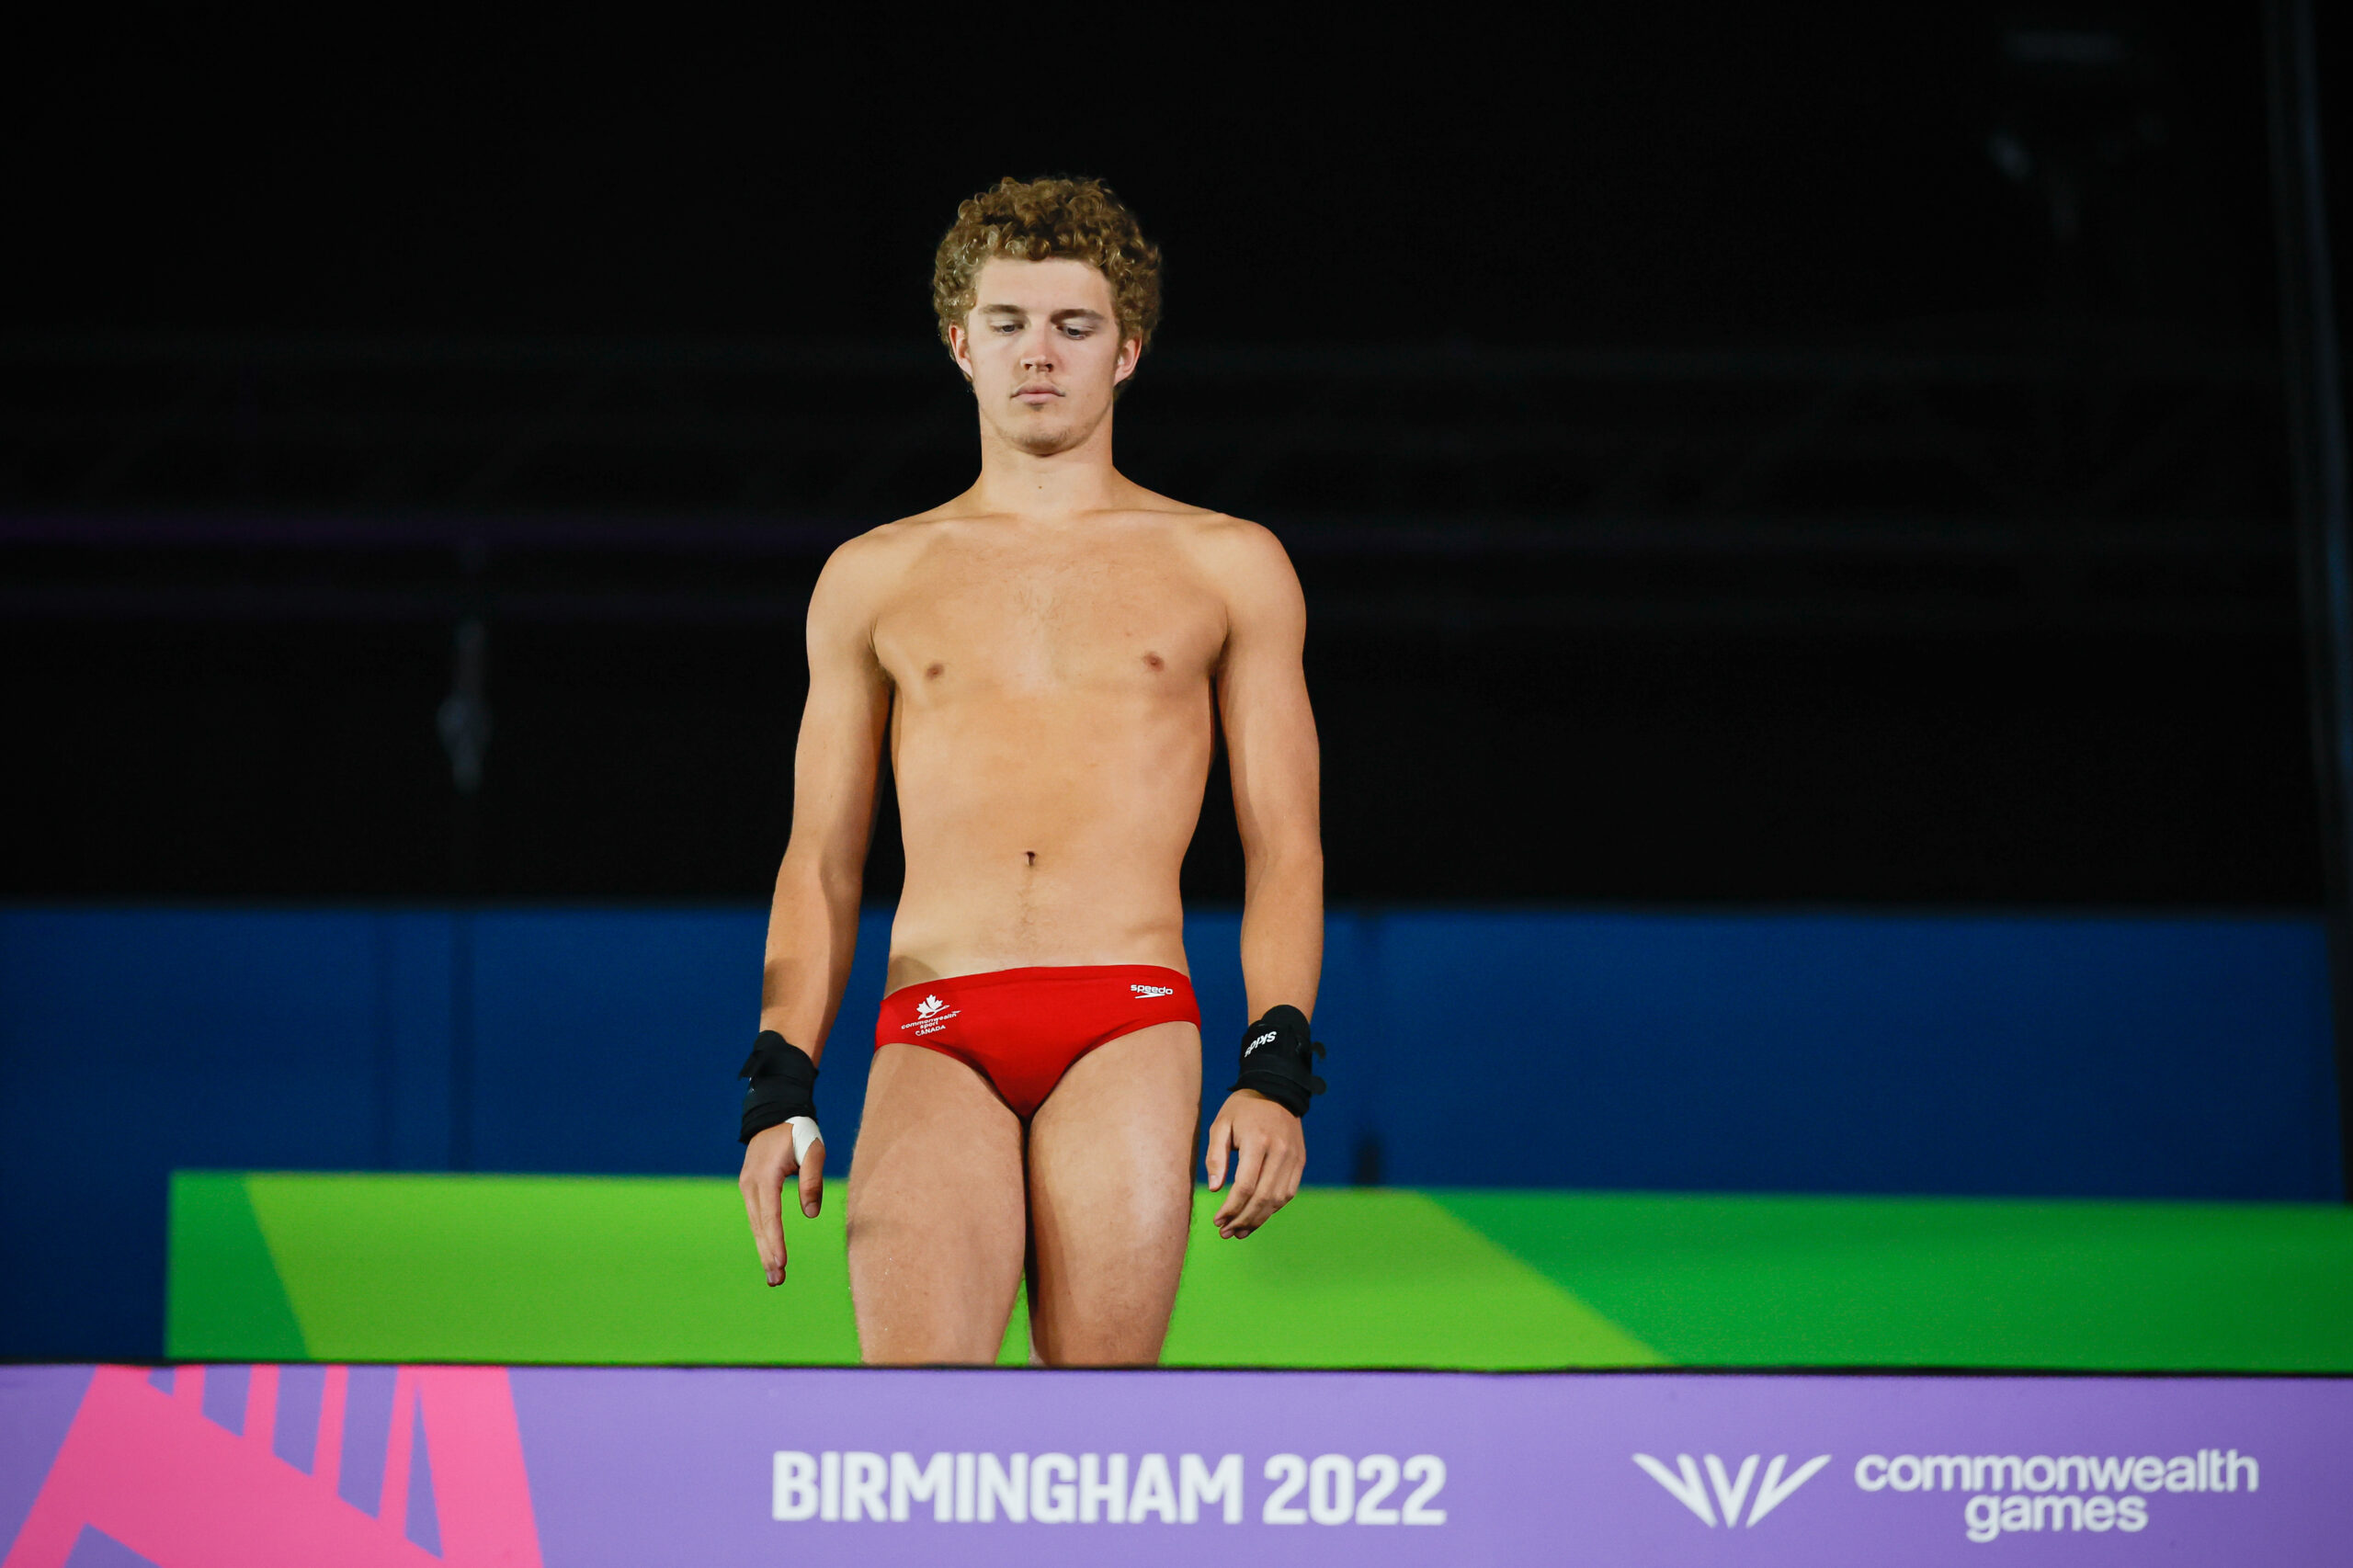 Silver for Rylan Wiens and bronze for Mia Vallée in Birmingham